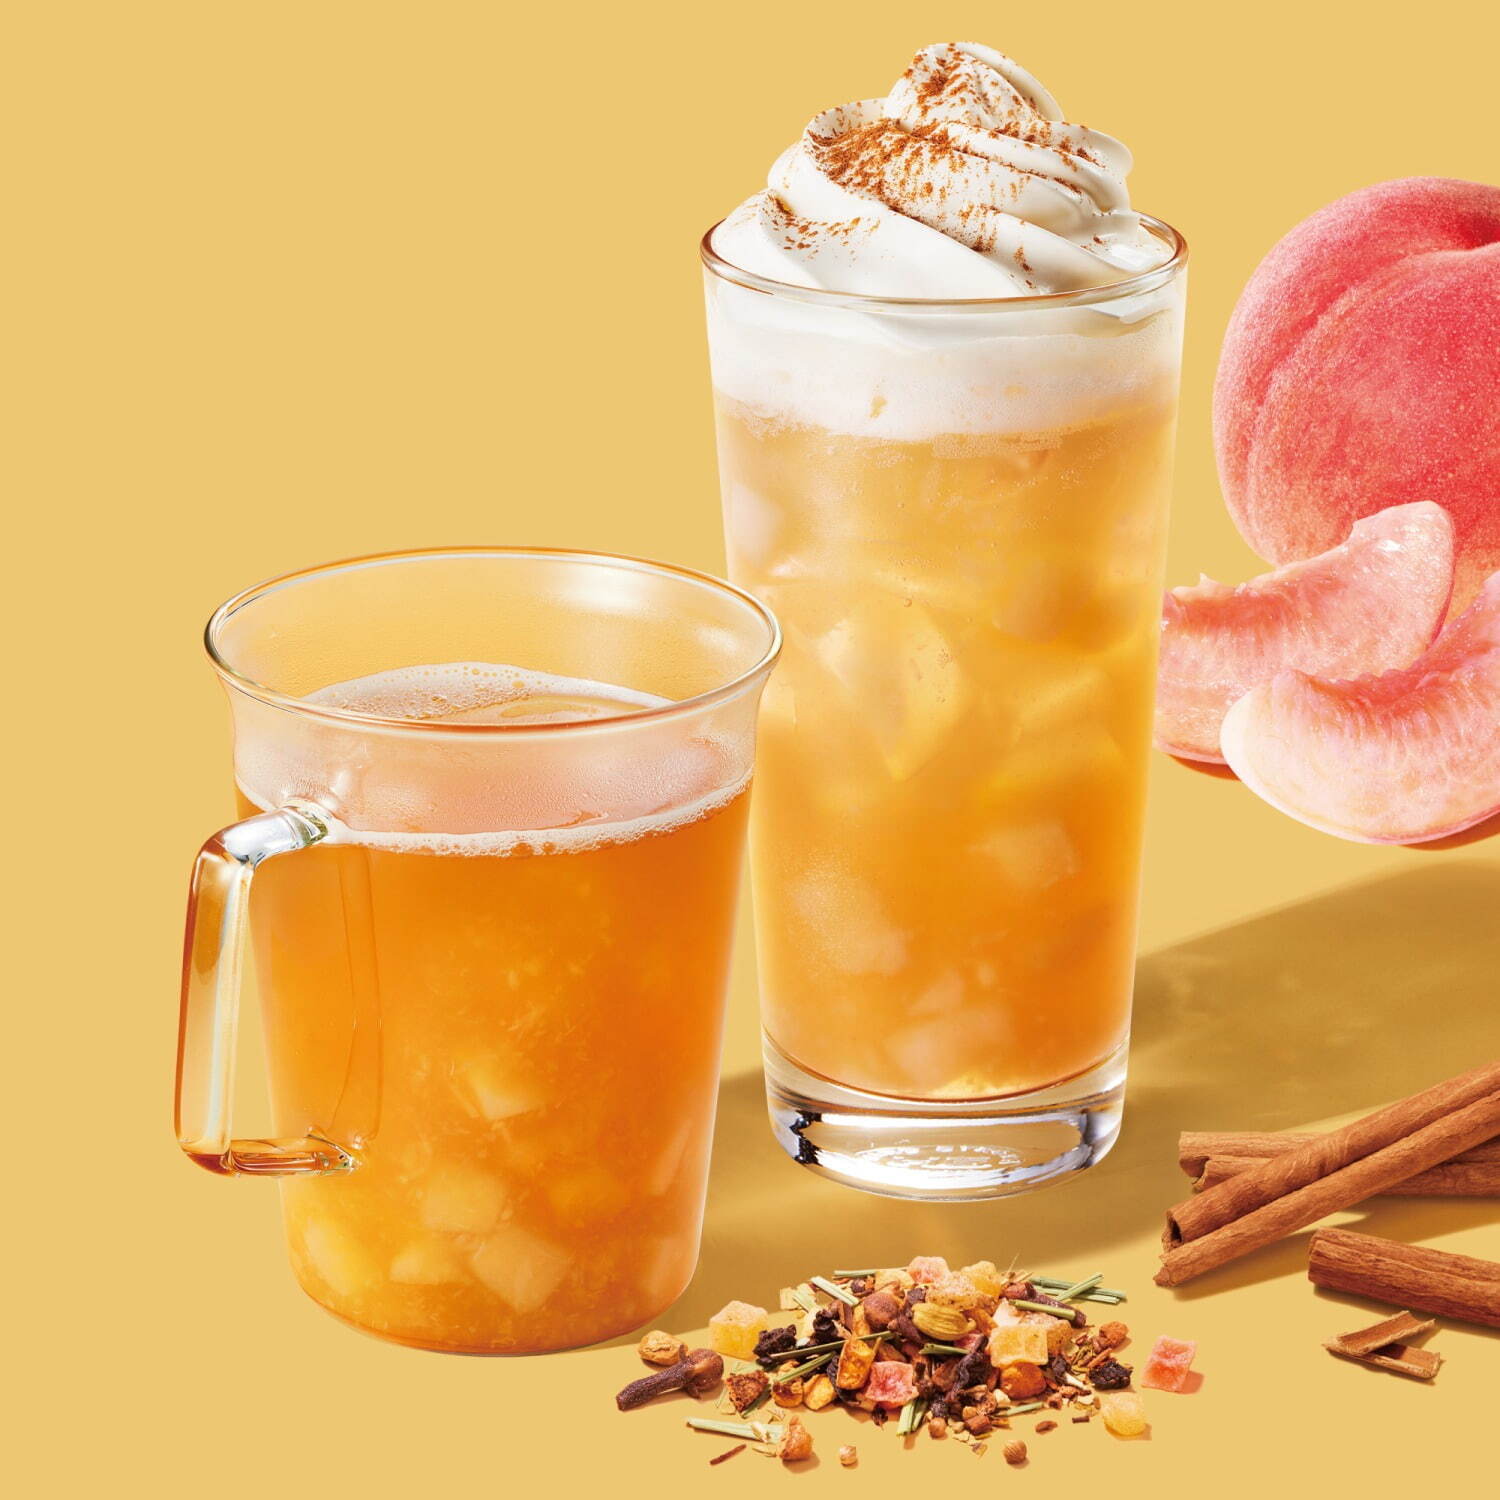 Peach & Majestic Chai Tea (Hot/Ice) Tall Only Take-out ¥638 / Eat-in ¥650